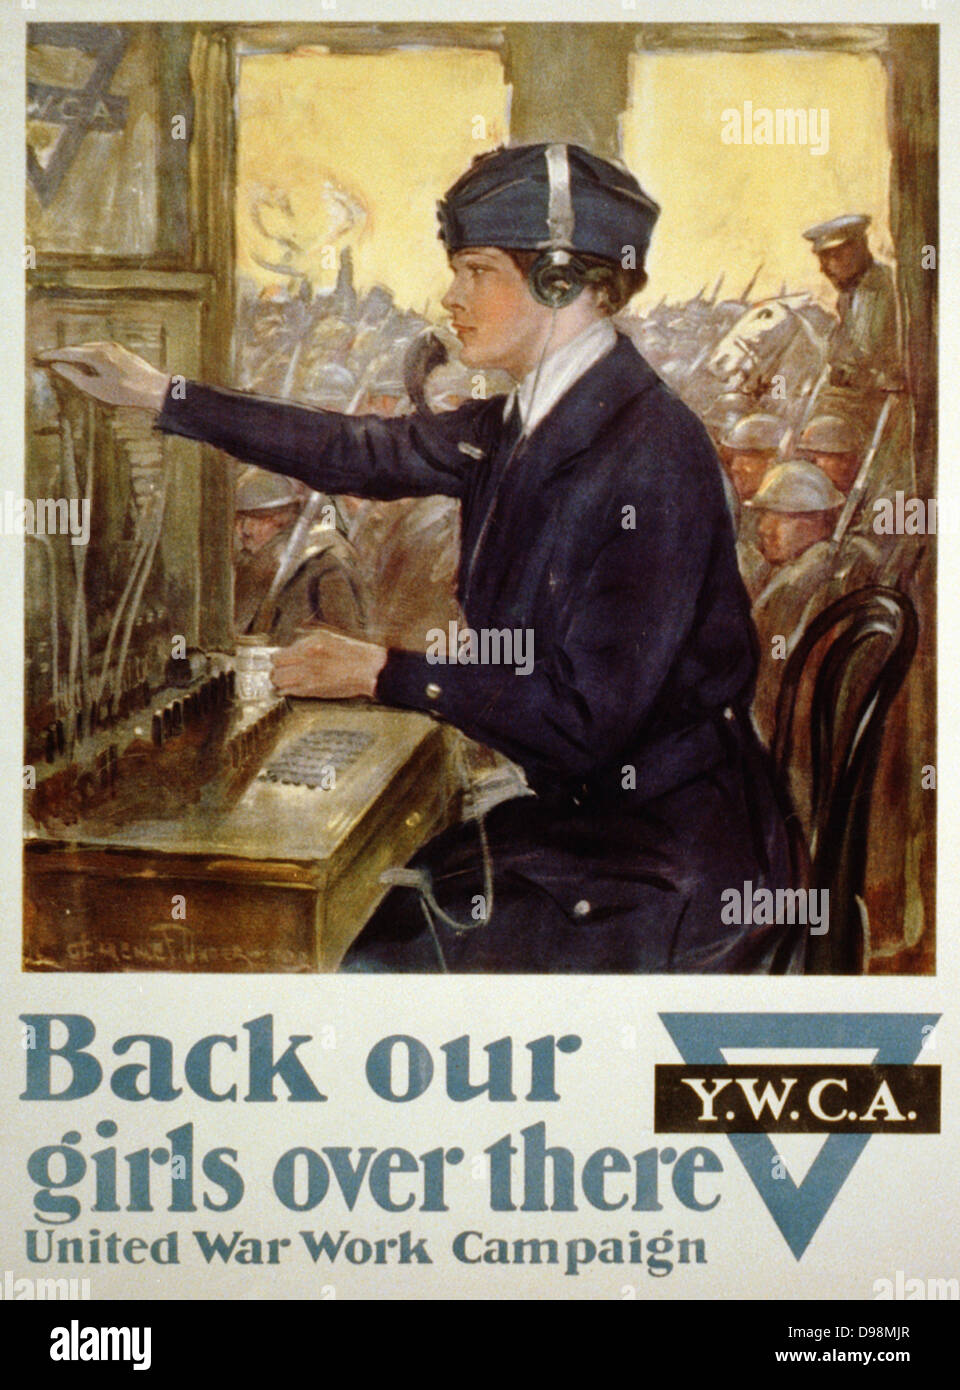 Back our girls over there United War Work Campaign by Clarence F. Underwood.  [1918] Y.W.C.A. poster for the United War Work Campaign showing a young woman seated at a switchboard with soldiers in the background. Young Women's Christian Association, World War I poster. Stock Photo